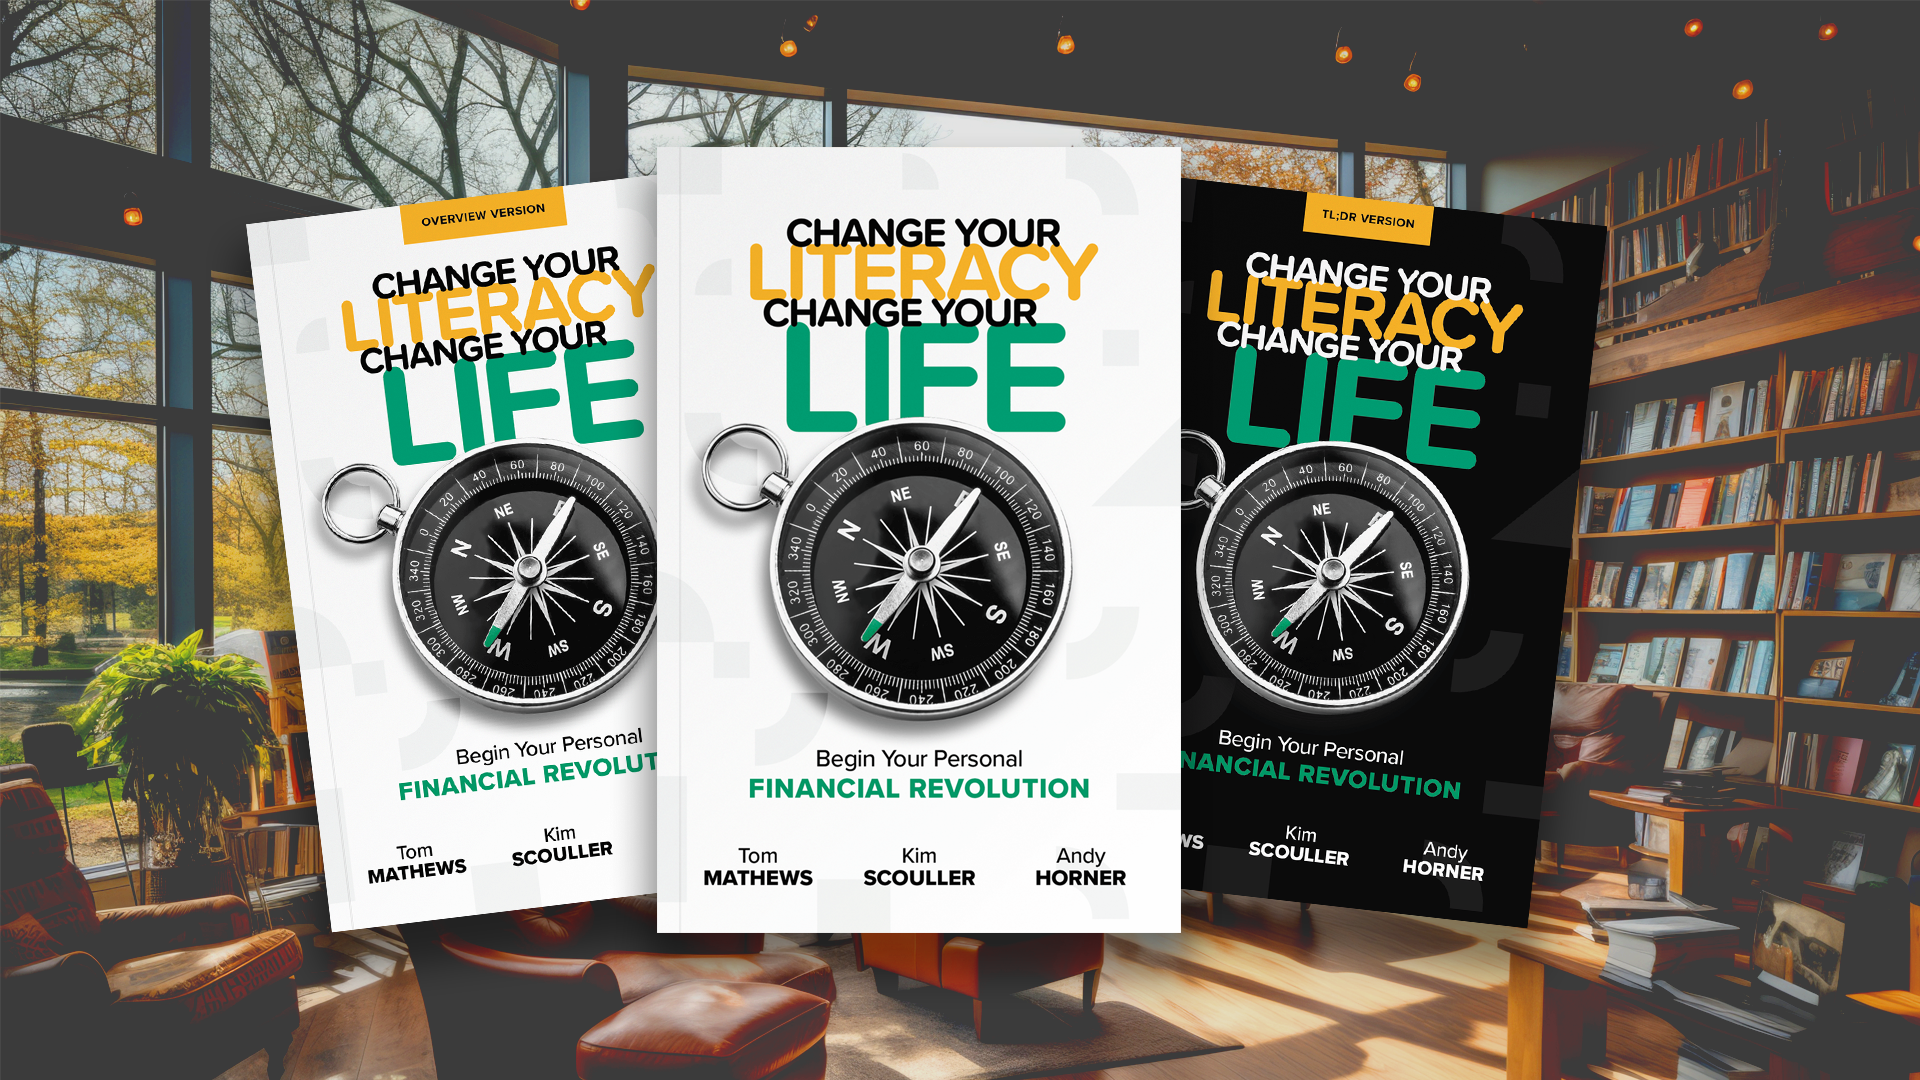 Introducing our New Ebook (with 3 Versions) and Webpage: "Change Your Literacy, Change Your Life"